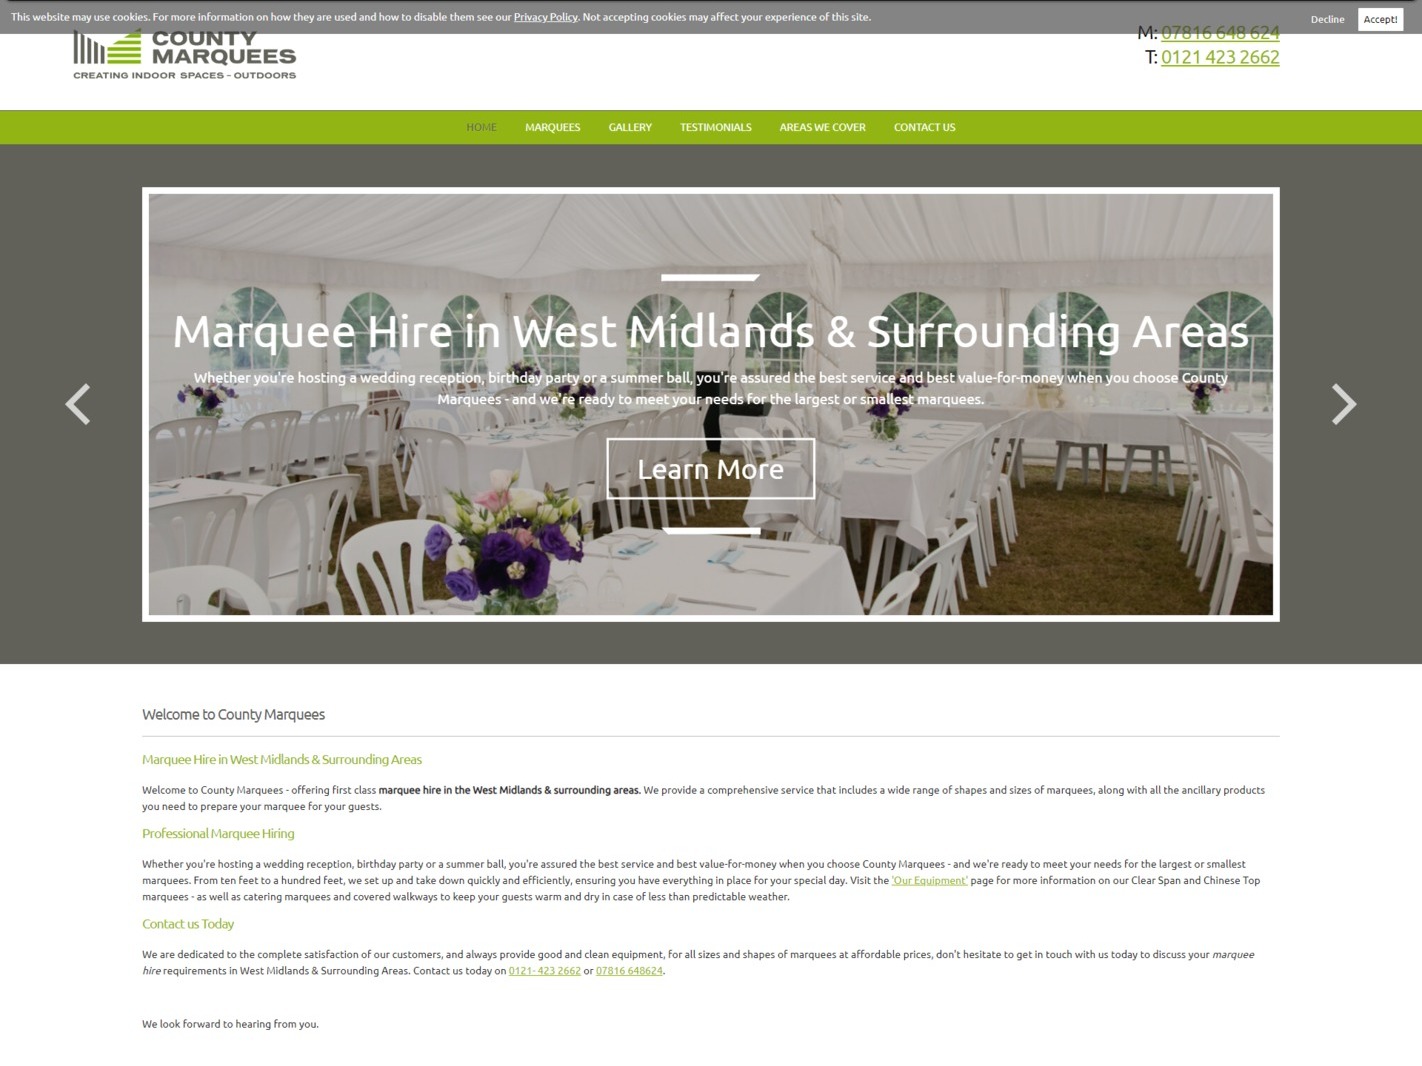 The previous County Marquees website from it'seeze